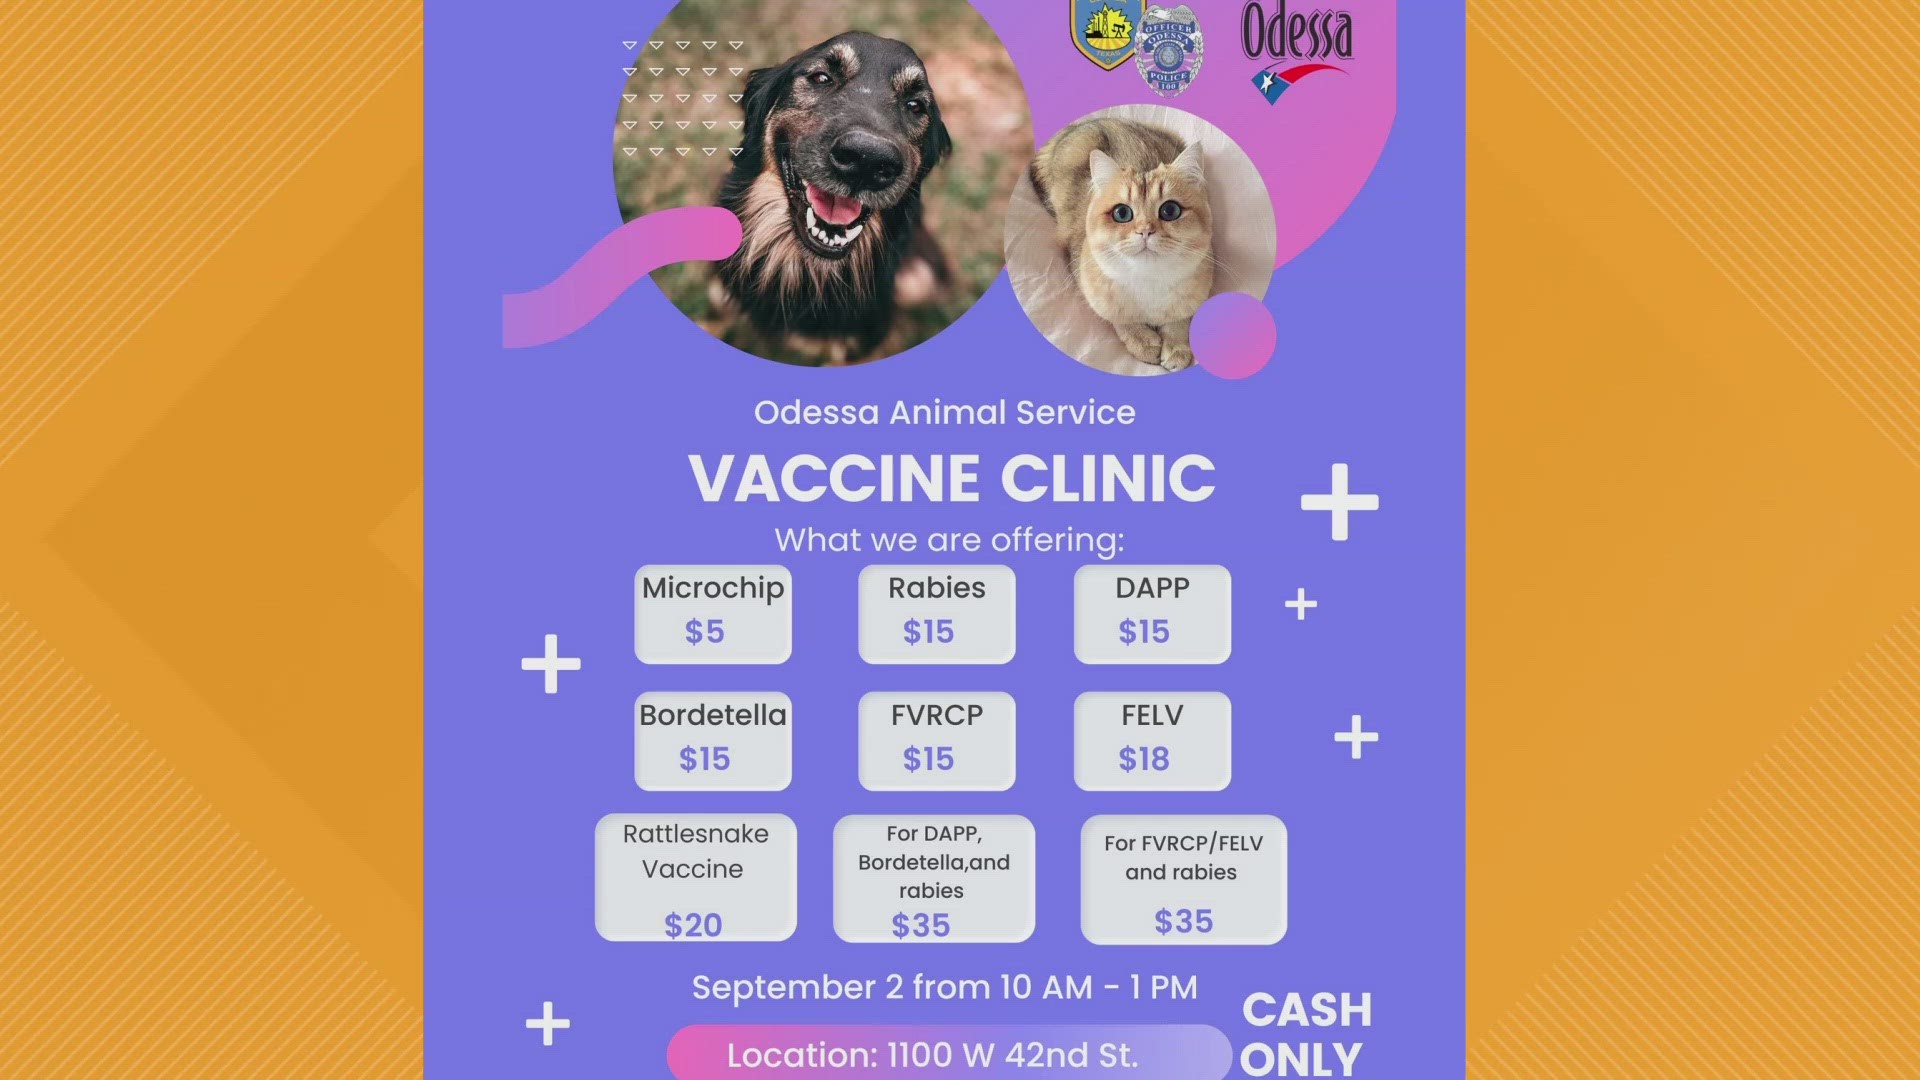 On Sept. 2, OAS is putting on a vaccine clinic from 10:00 a.m. to 1:00 p.m. They are offering $5 microchips and $15 rabies shots.